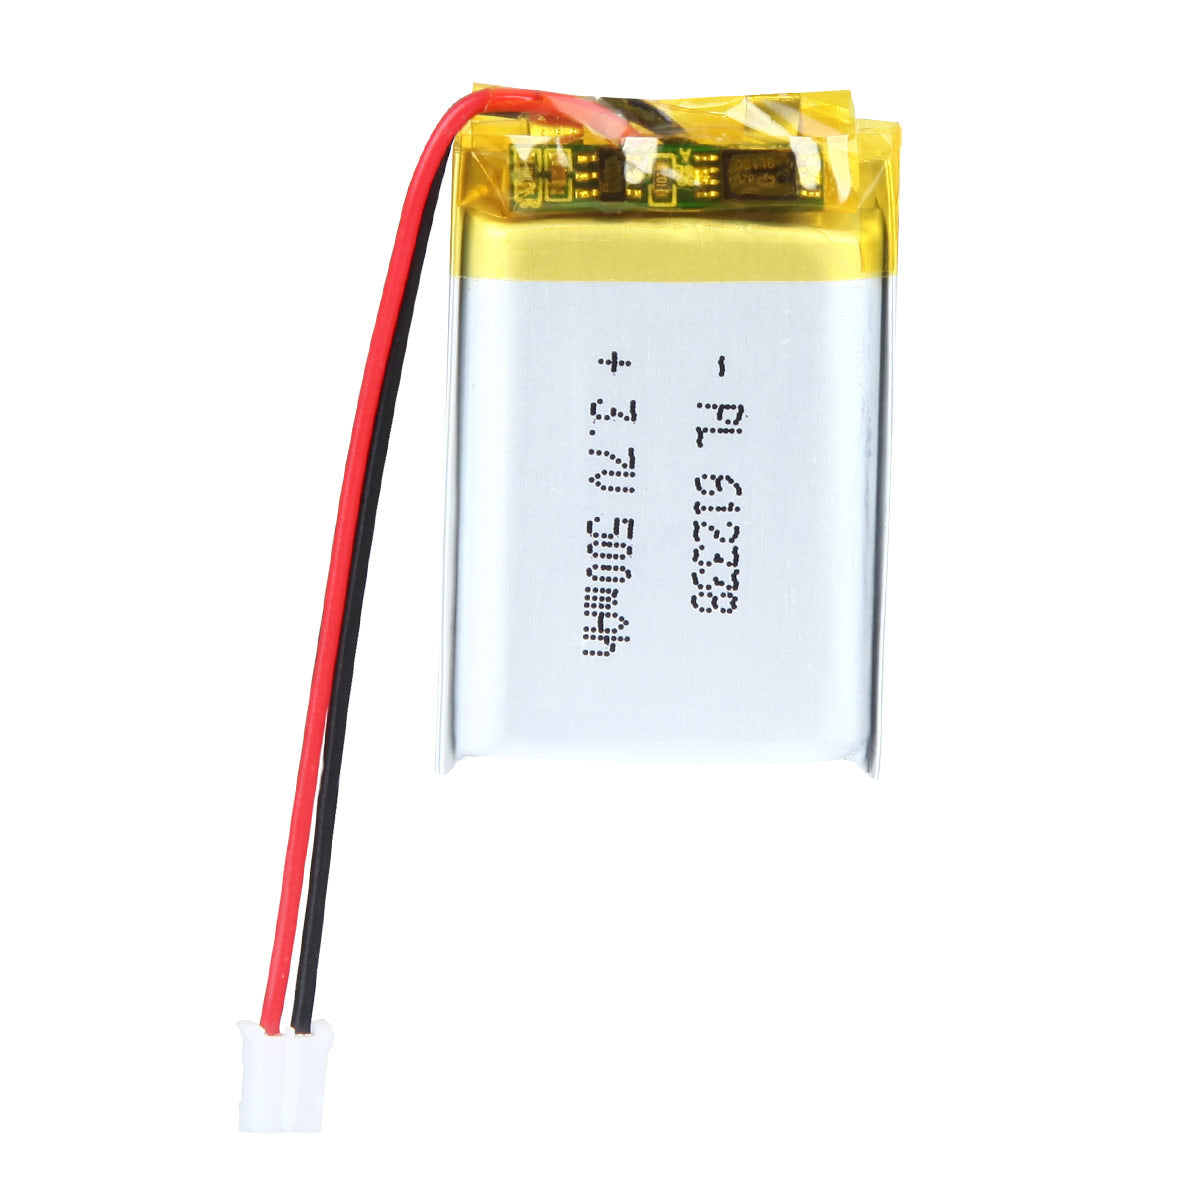 YDL 3.7V 500mAh 612338 Rechargeable Polymer Lithium-Ion Battery Length 40mm